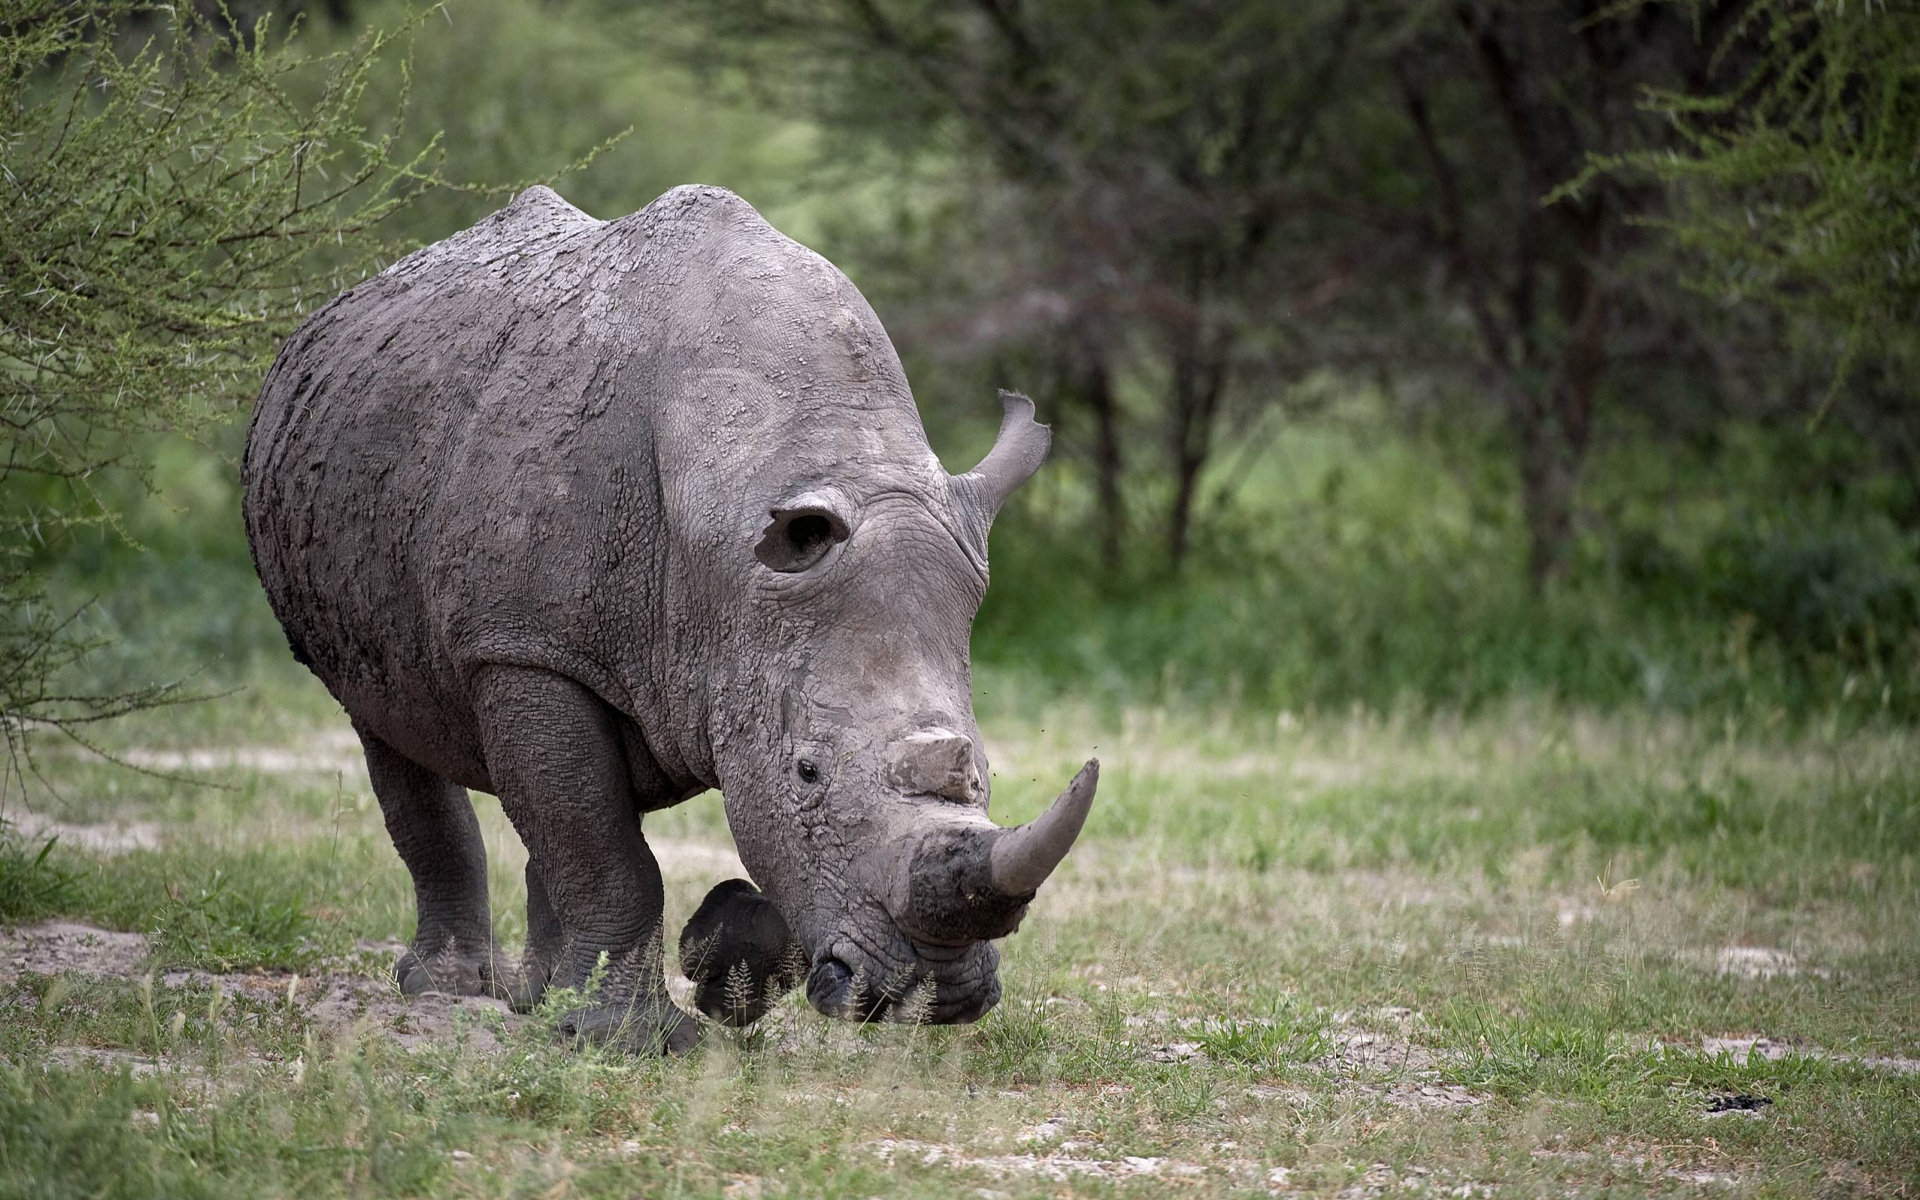 Rhino wallpapers in HD, Desktop backgrounds with rhinos, High-definition rhino images, Rhino picture collection, 1920x1200 HD Desktop